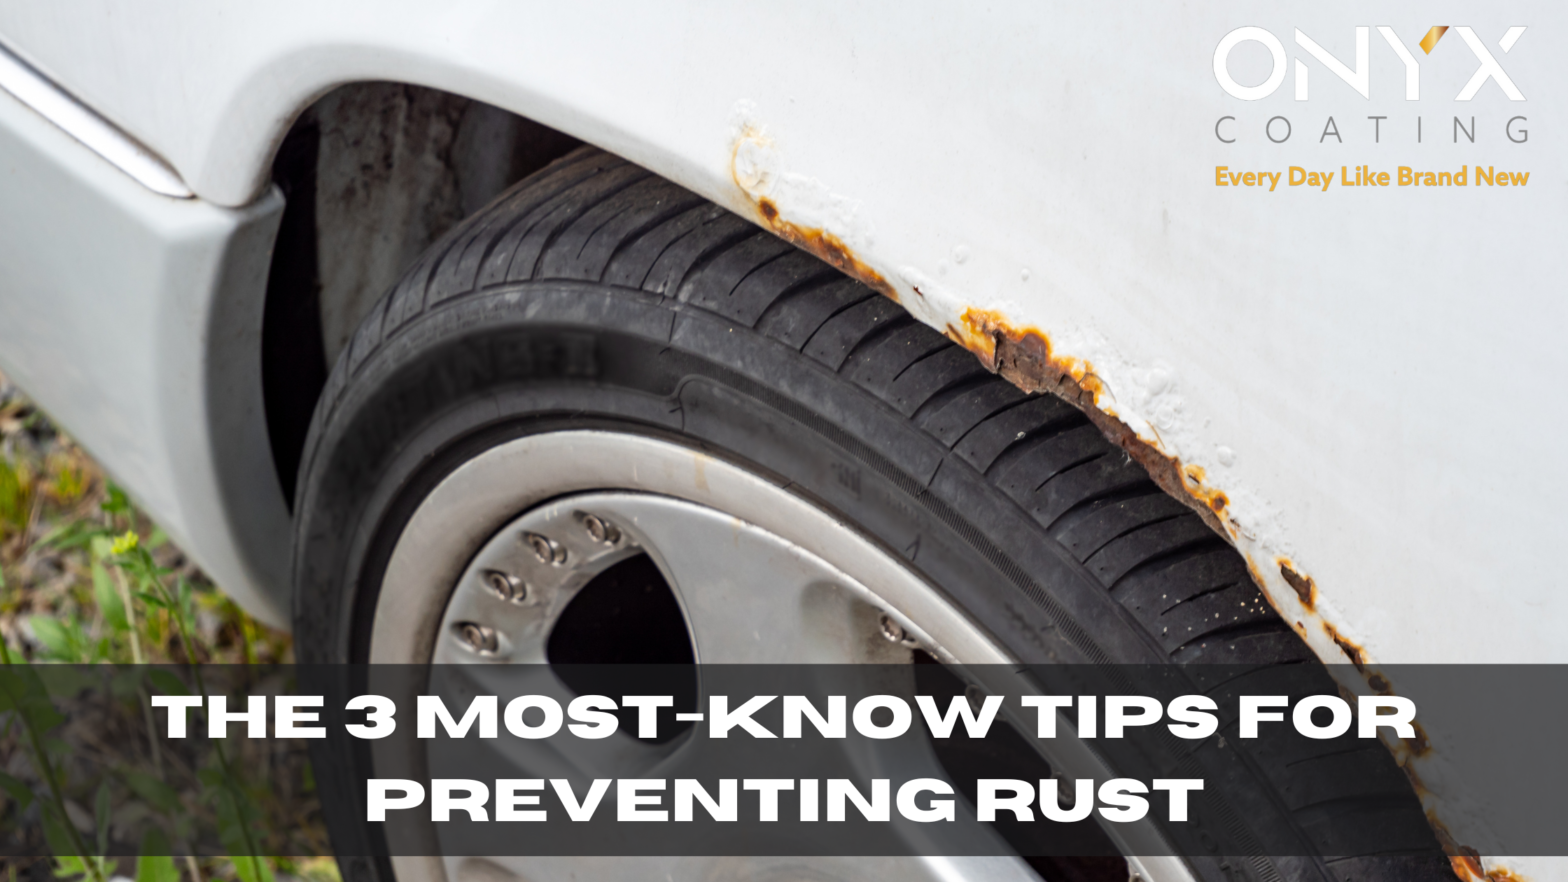 The 3 most-know tips for preventing rust